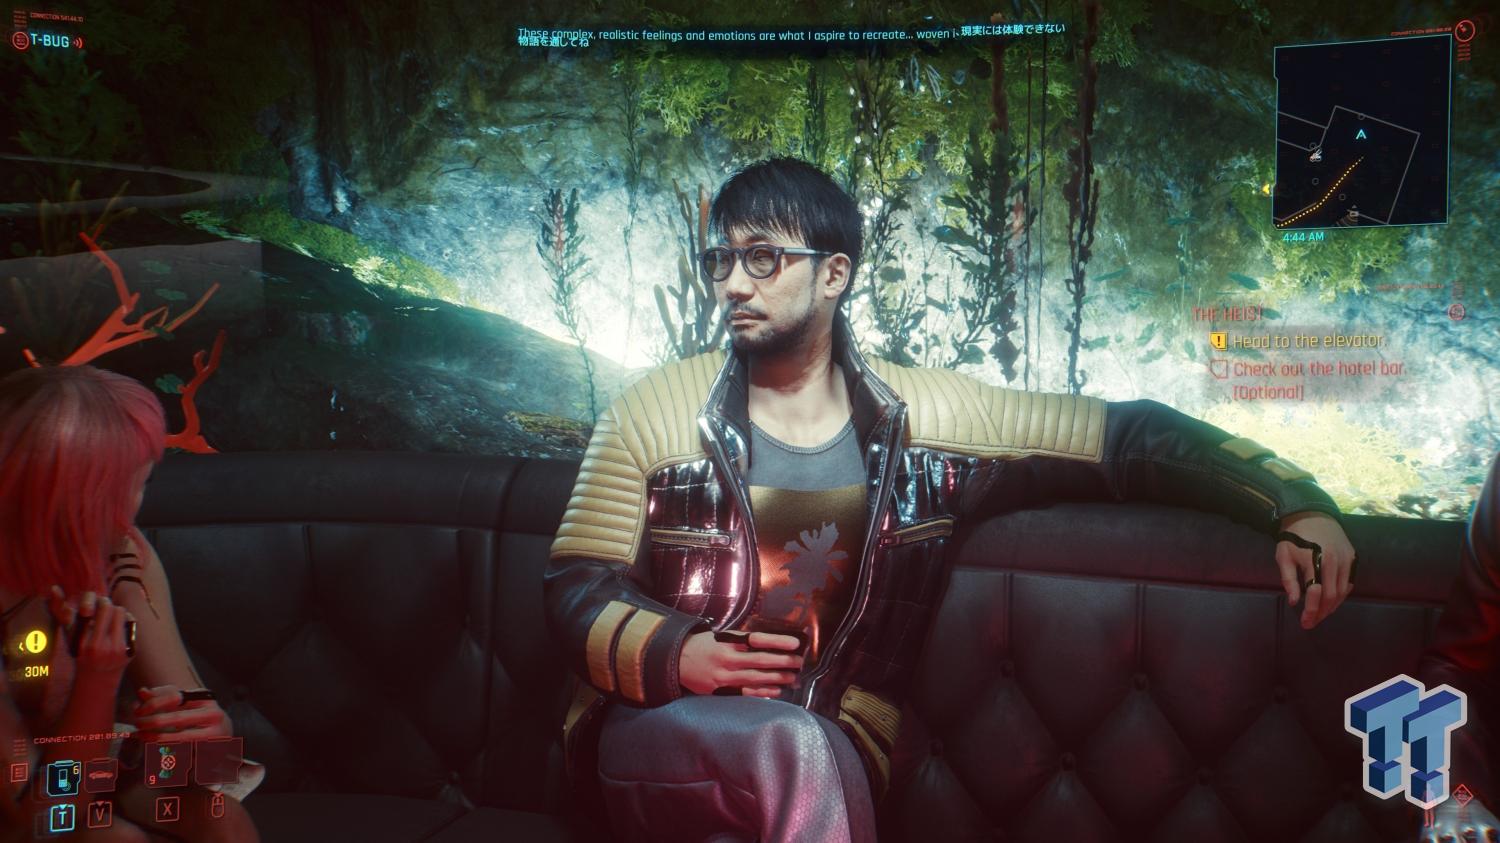 So, I met Hideo Kojima in Cyberpunk 2077 and he was an ass to me